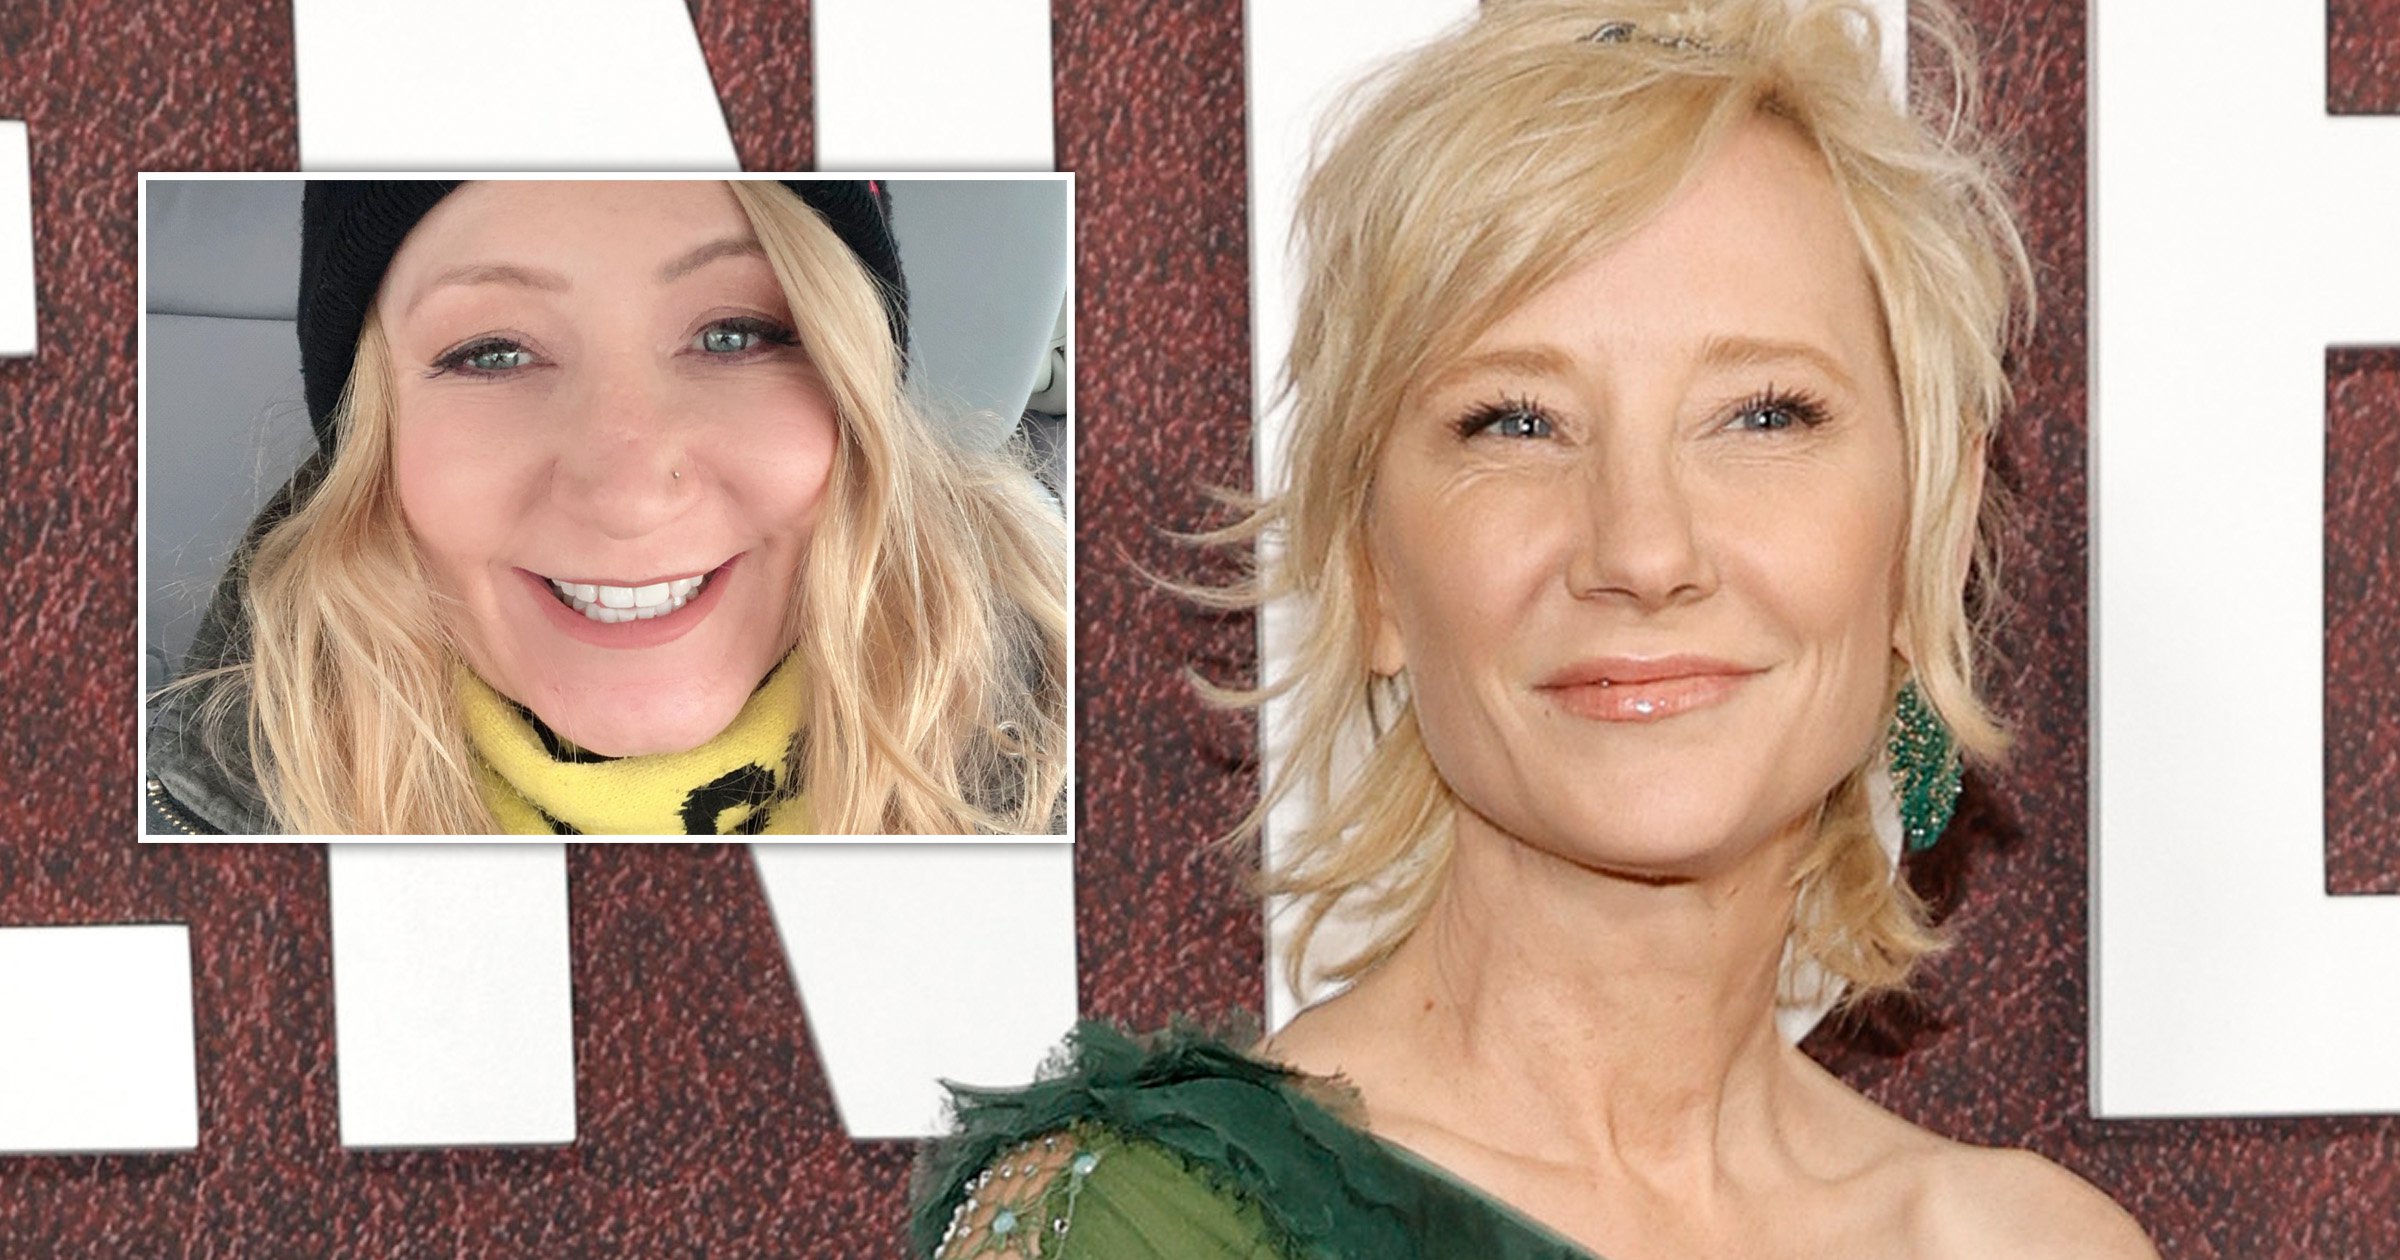 Anne Heche crash: Fans raise over $80,000 for woman who lost house after accident